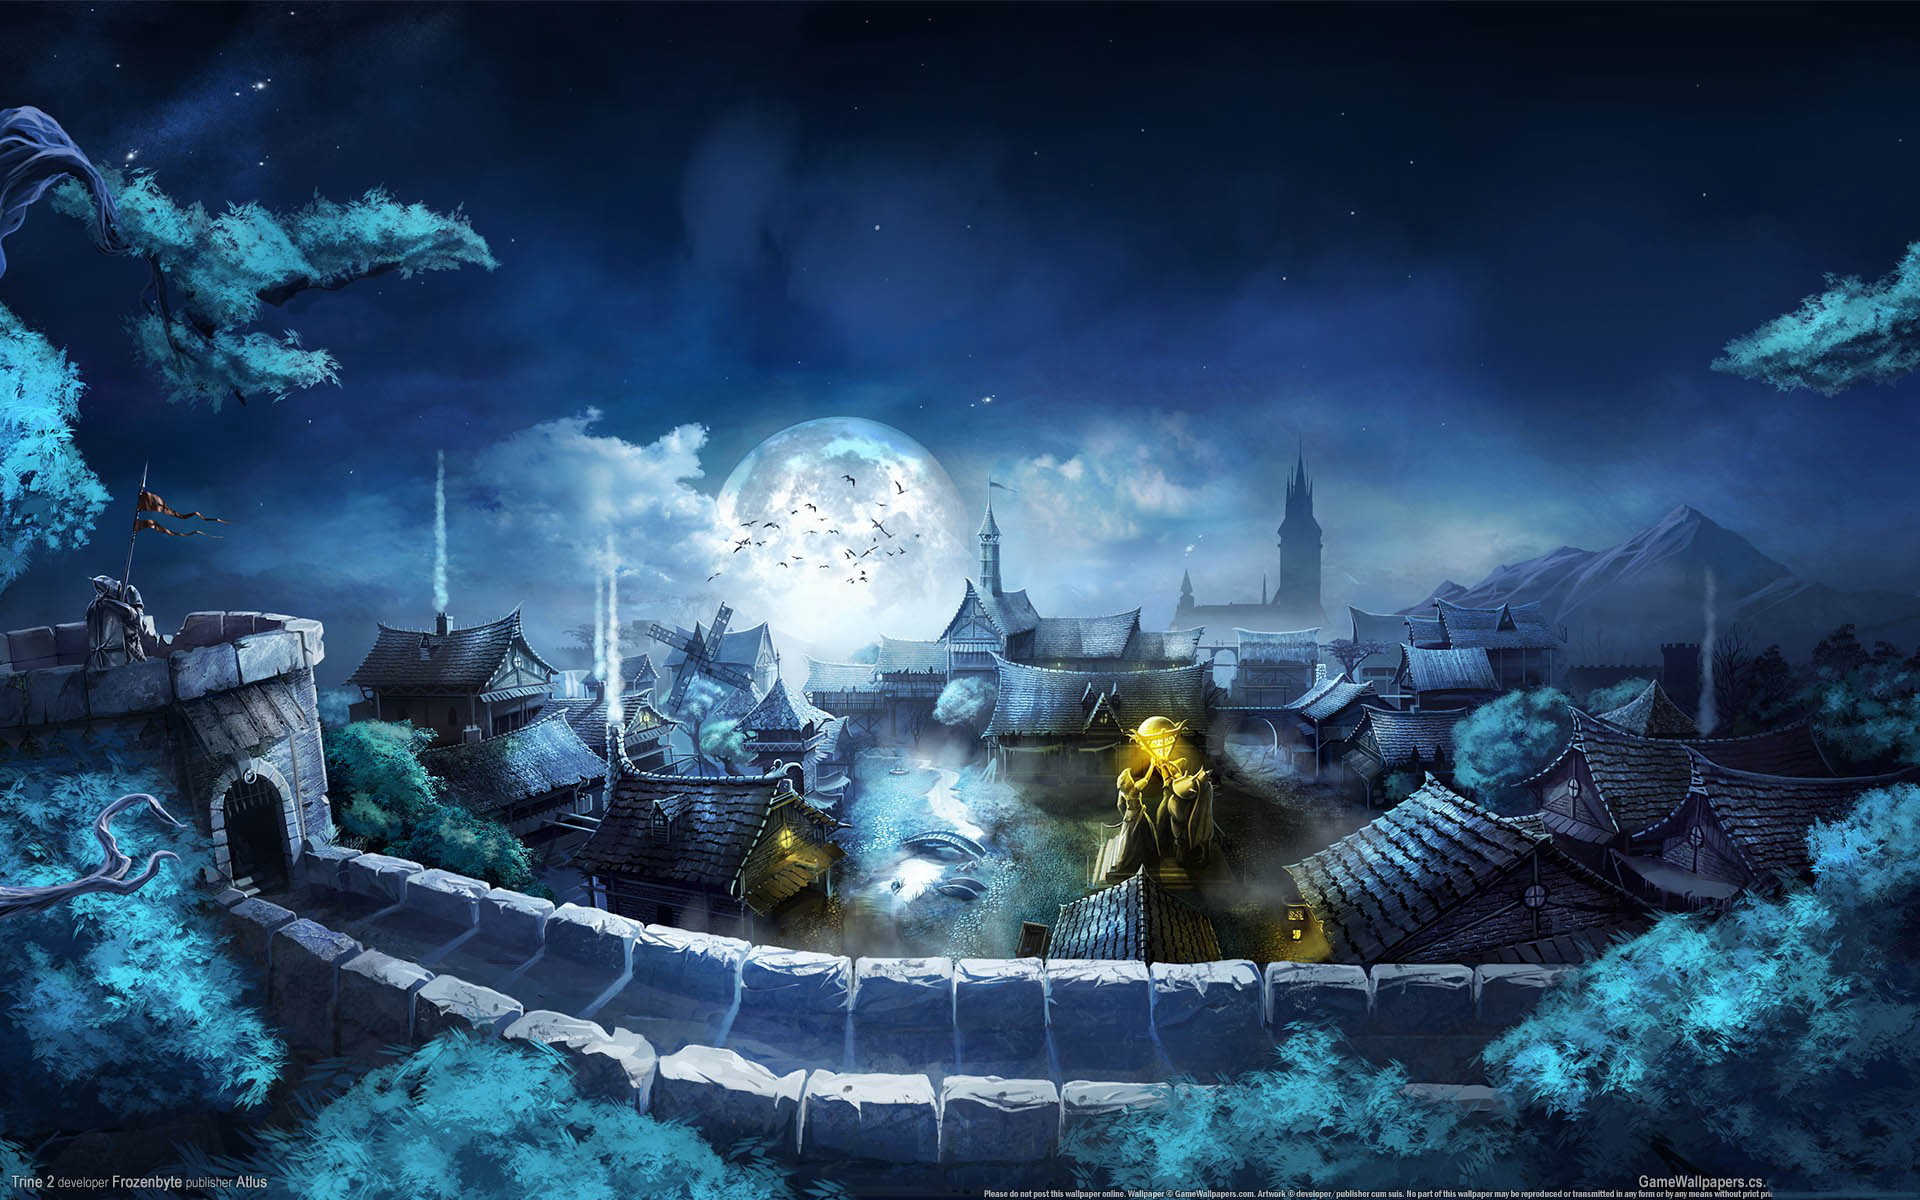 ... best collection of top 10 Trine 2 Wallpapers. These wallpapers are high definition and available in wide range of sizes and resolutions.